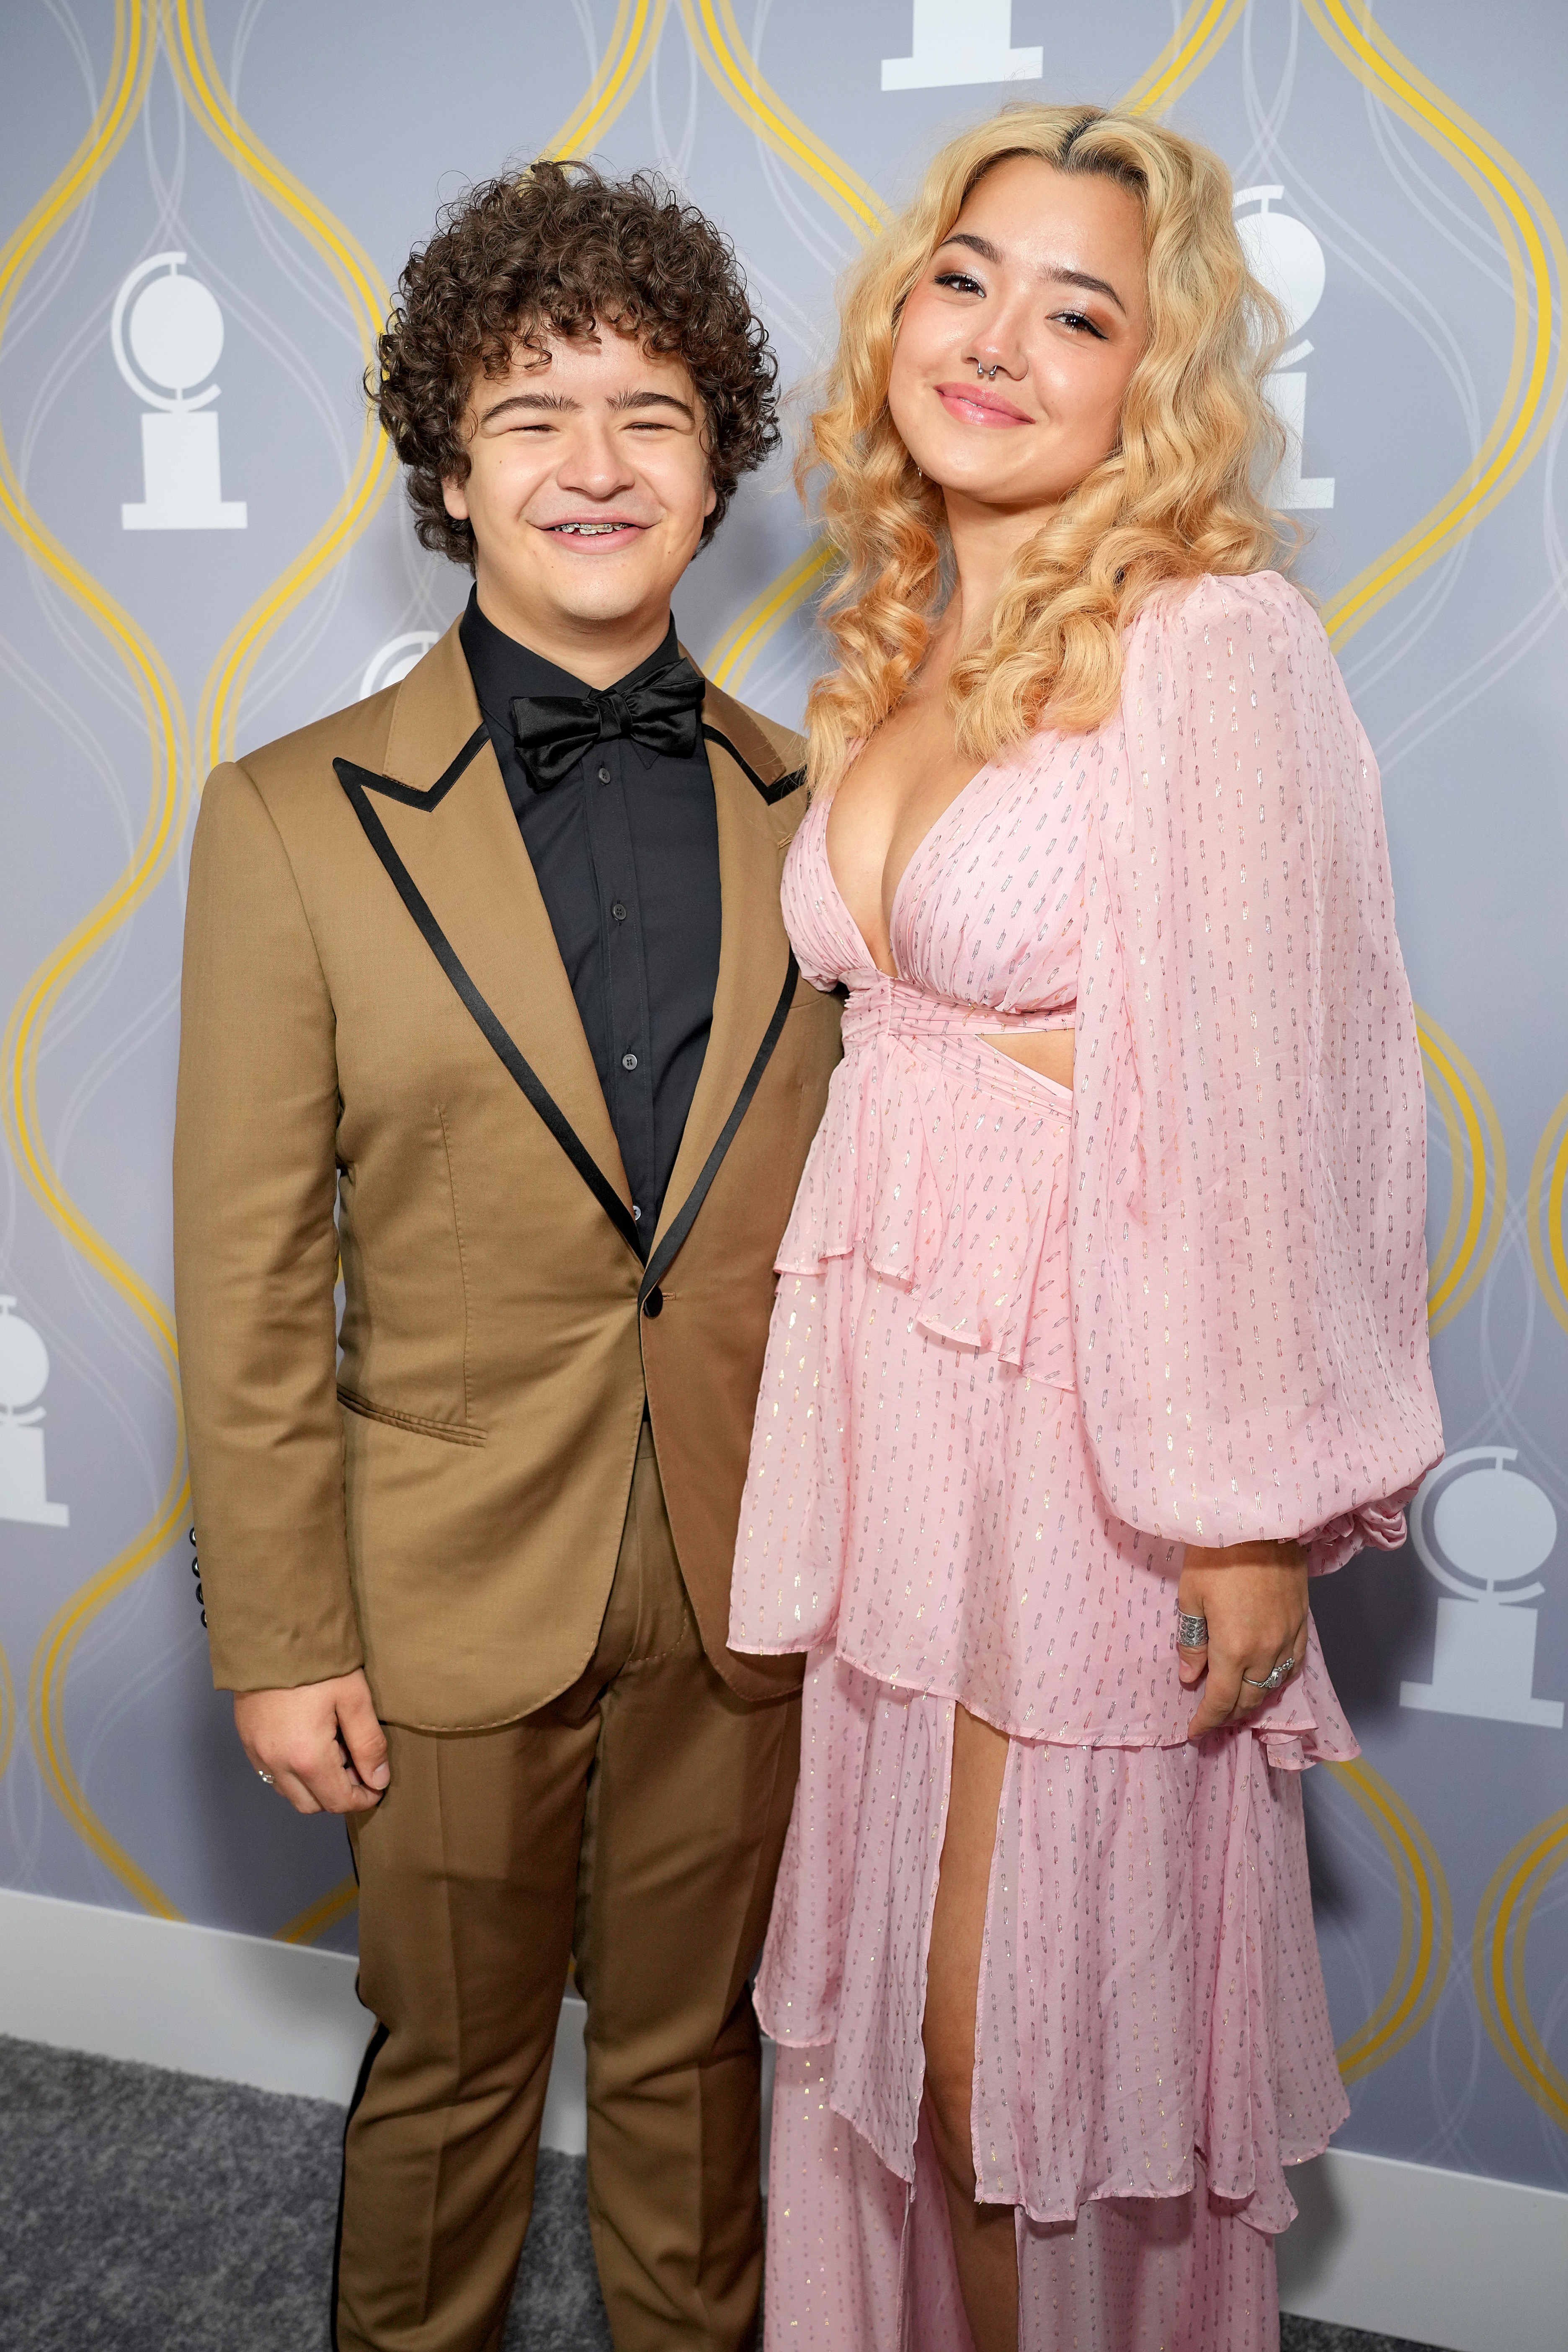 Gaten Matarazzo and Elizabeth Yu at the 75th Annual Tony Awards held at Radio City Music Hall in New York City on June 12, 2022. | Source: Getty Images